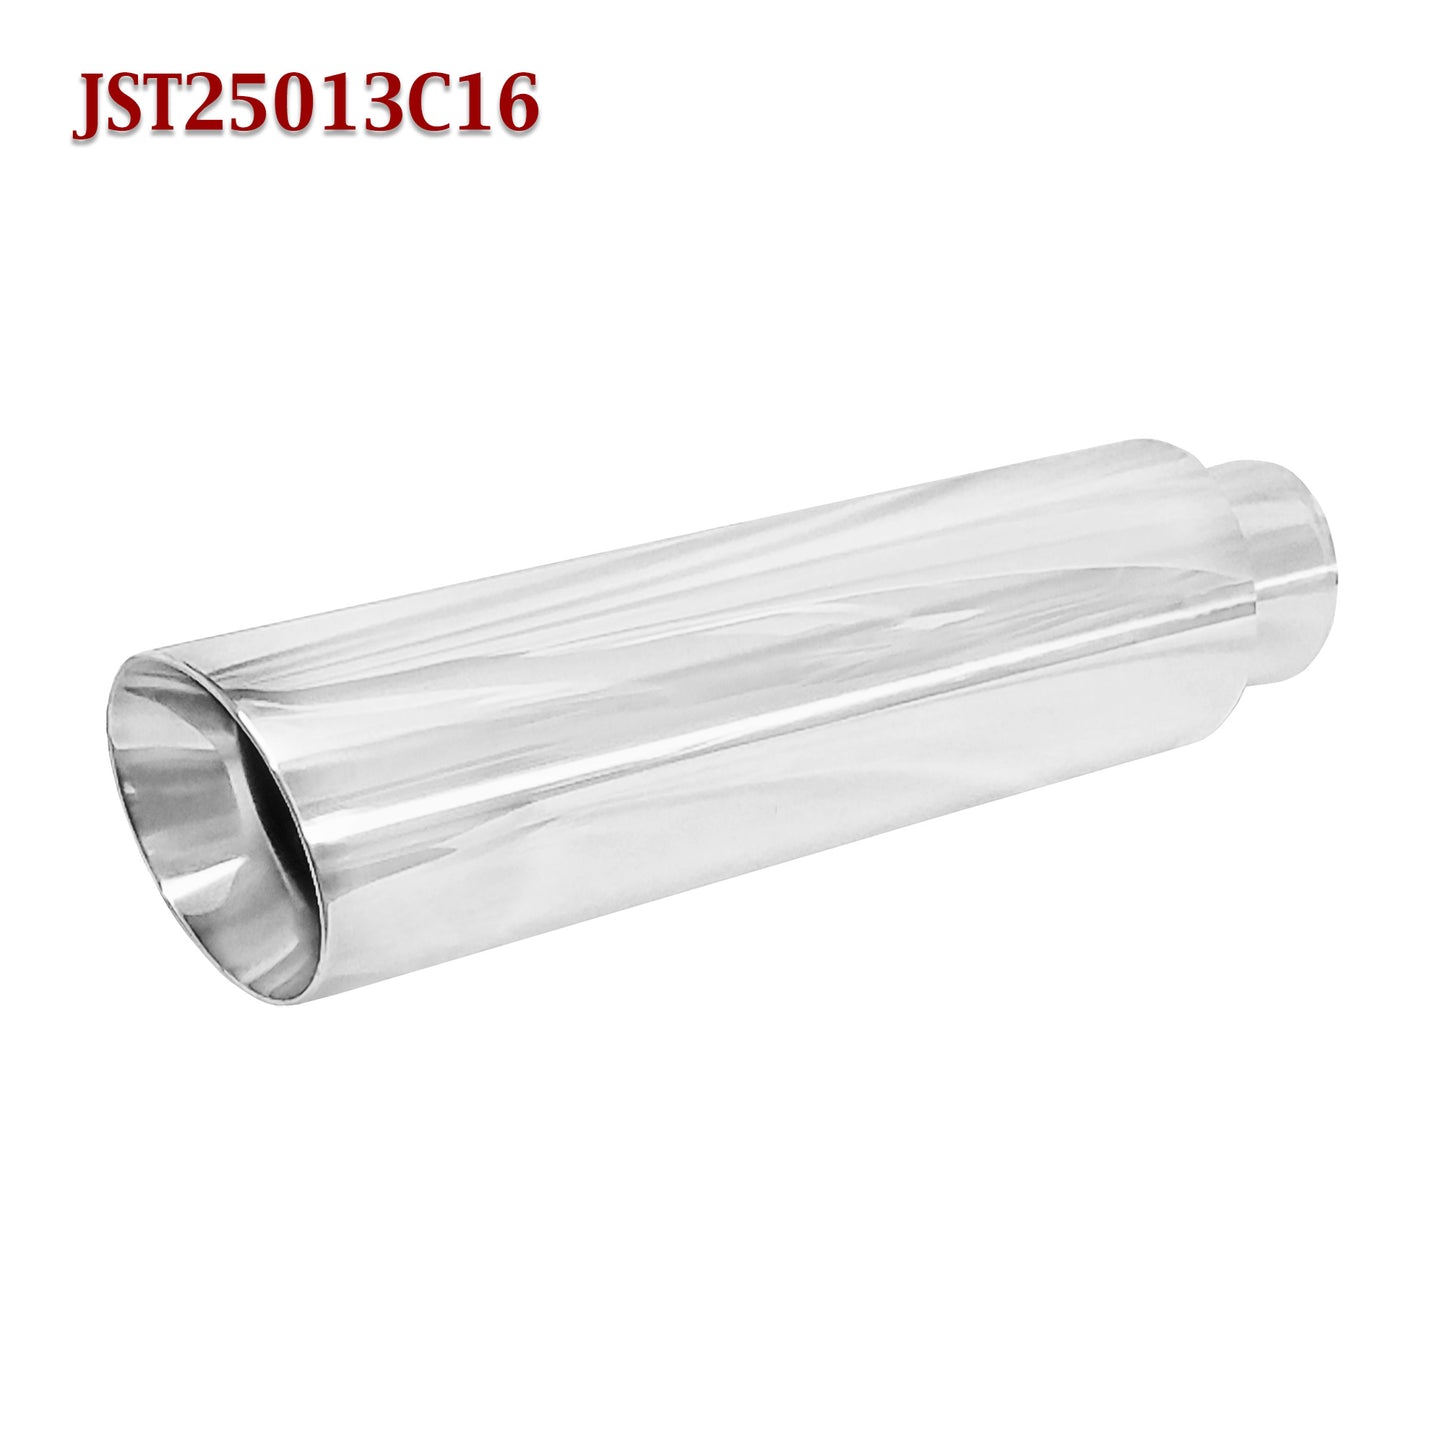 JST25013C16 2.5" Stainless Round Truck Exhaust Tips 2 1/2" Inlet / 16" Long